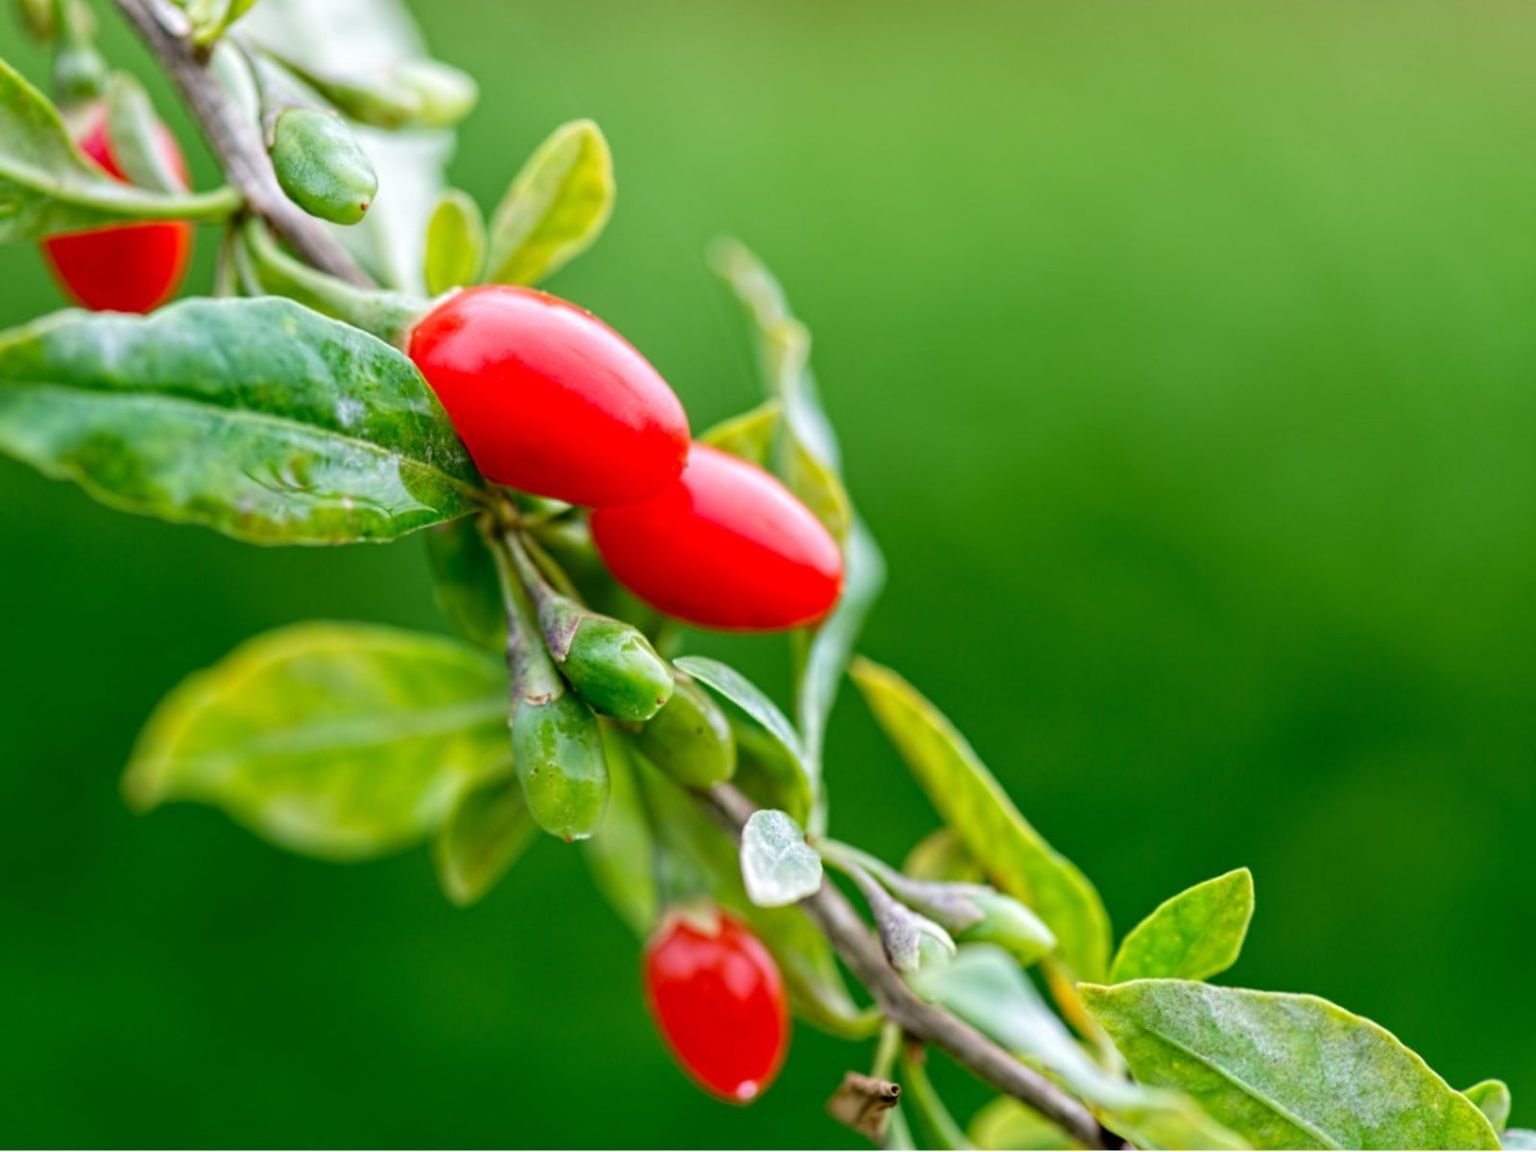 Growing Goji Berries: Cultivation Tips for a Sustainable Harvest